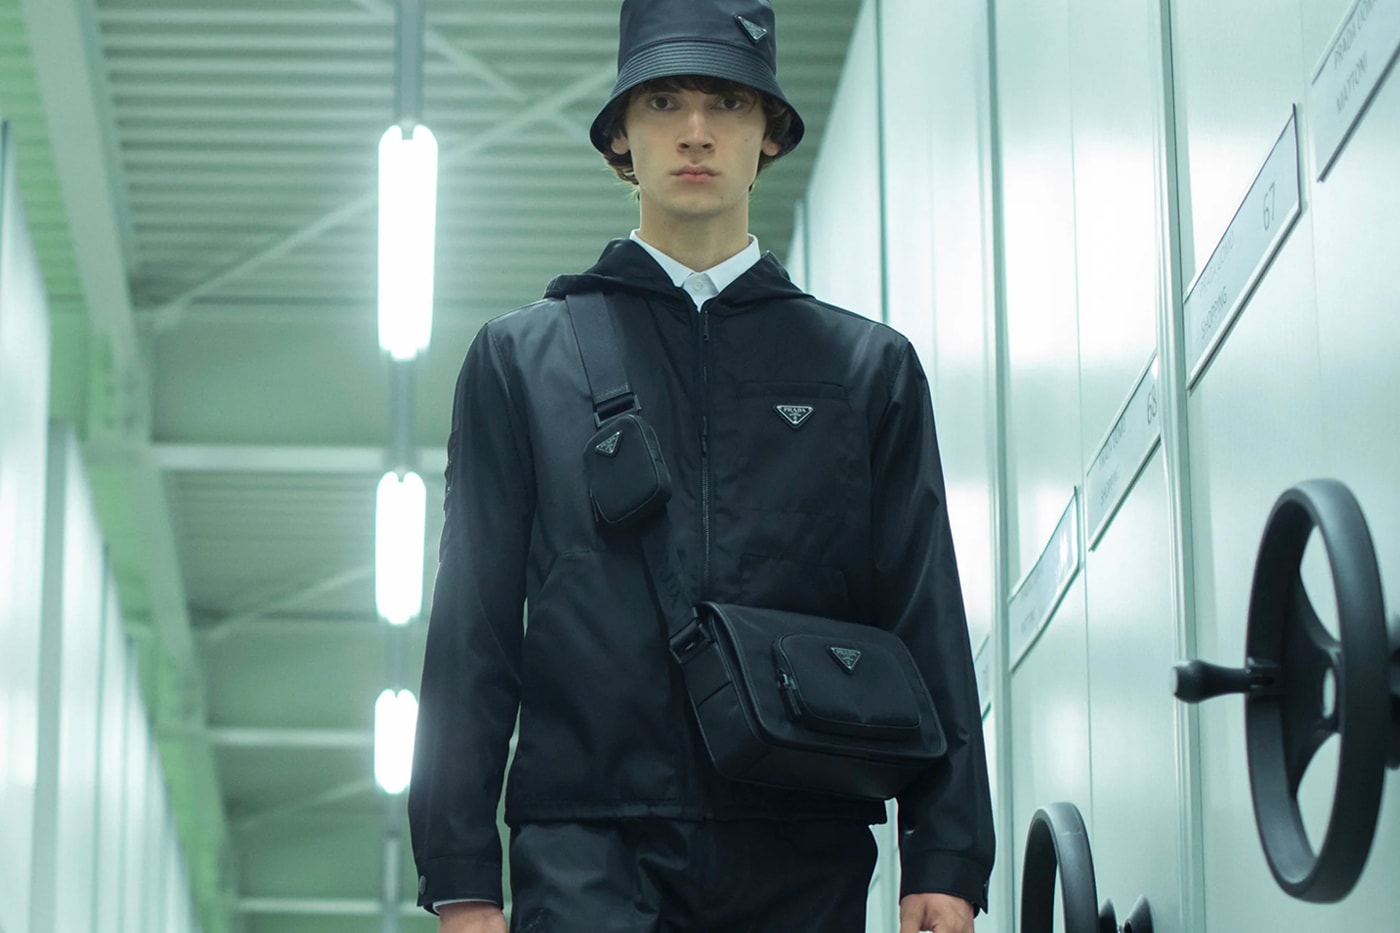 Prada Mistake Offer 99 Percent Off Sale menswear streetwear fall winter 2020 collection hats bags jackets shirts pants discount